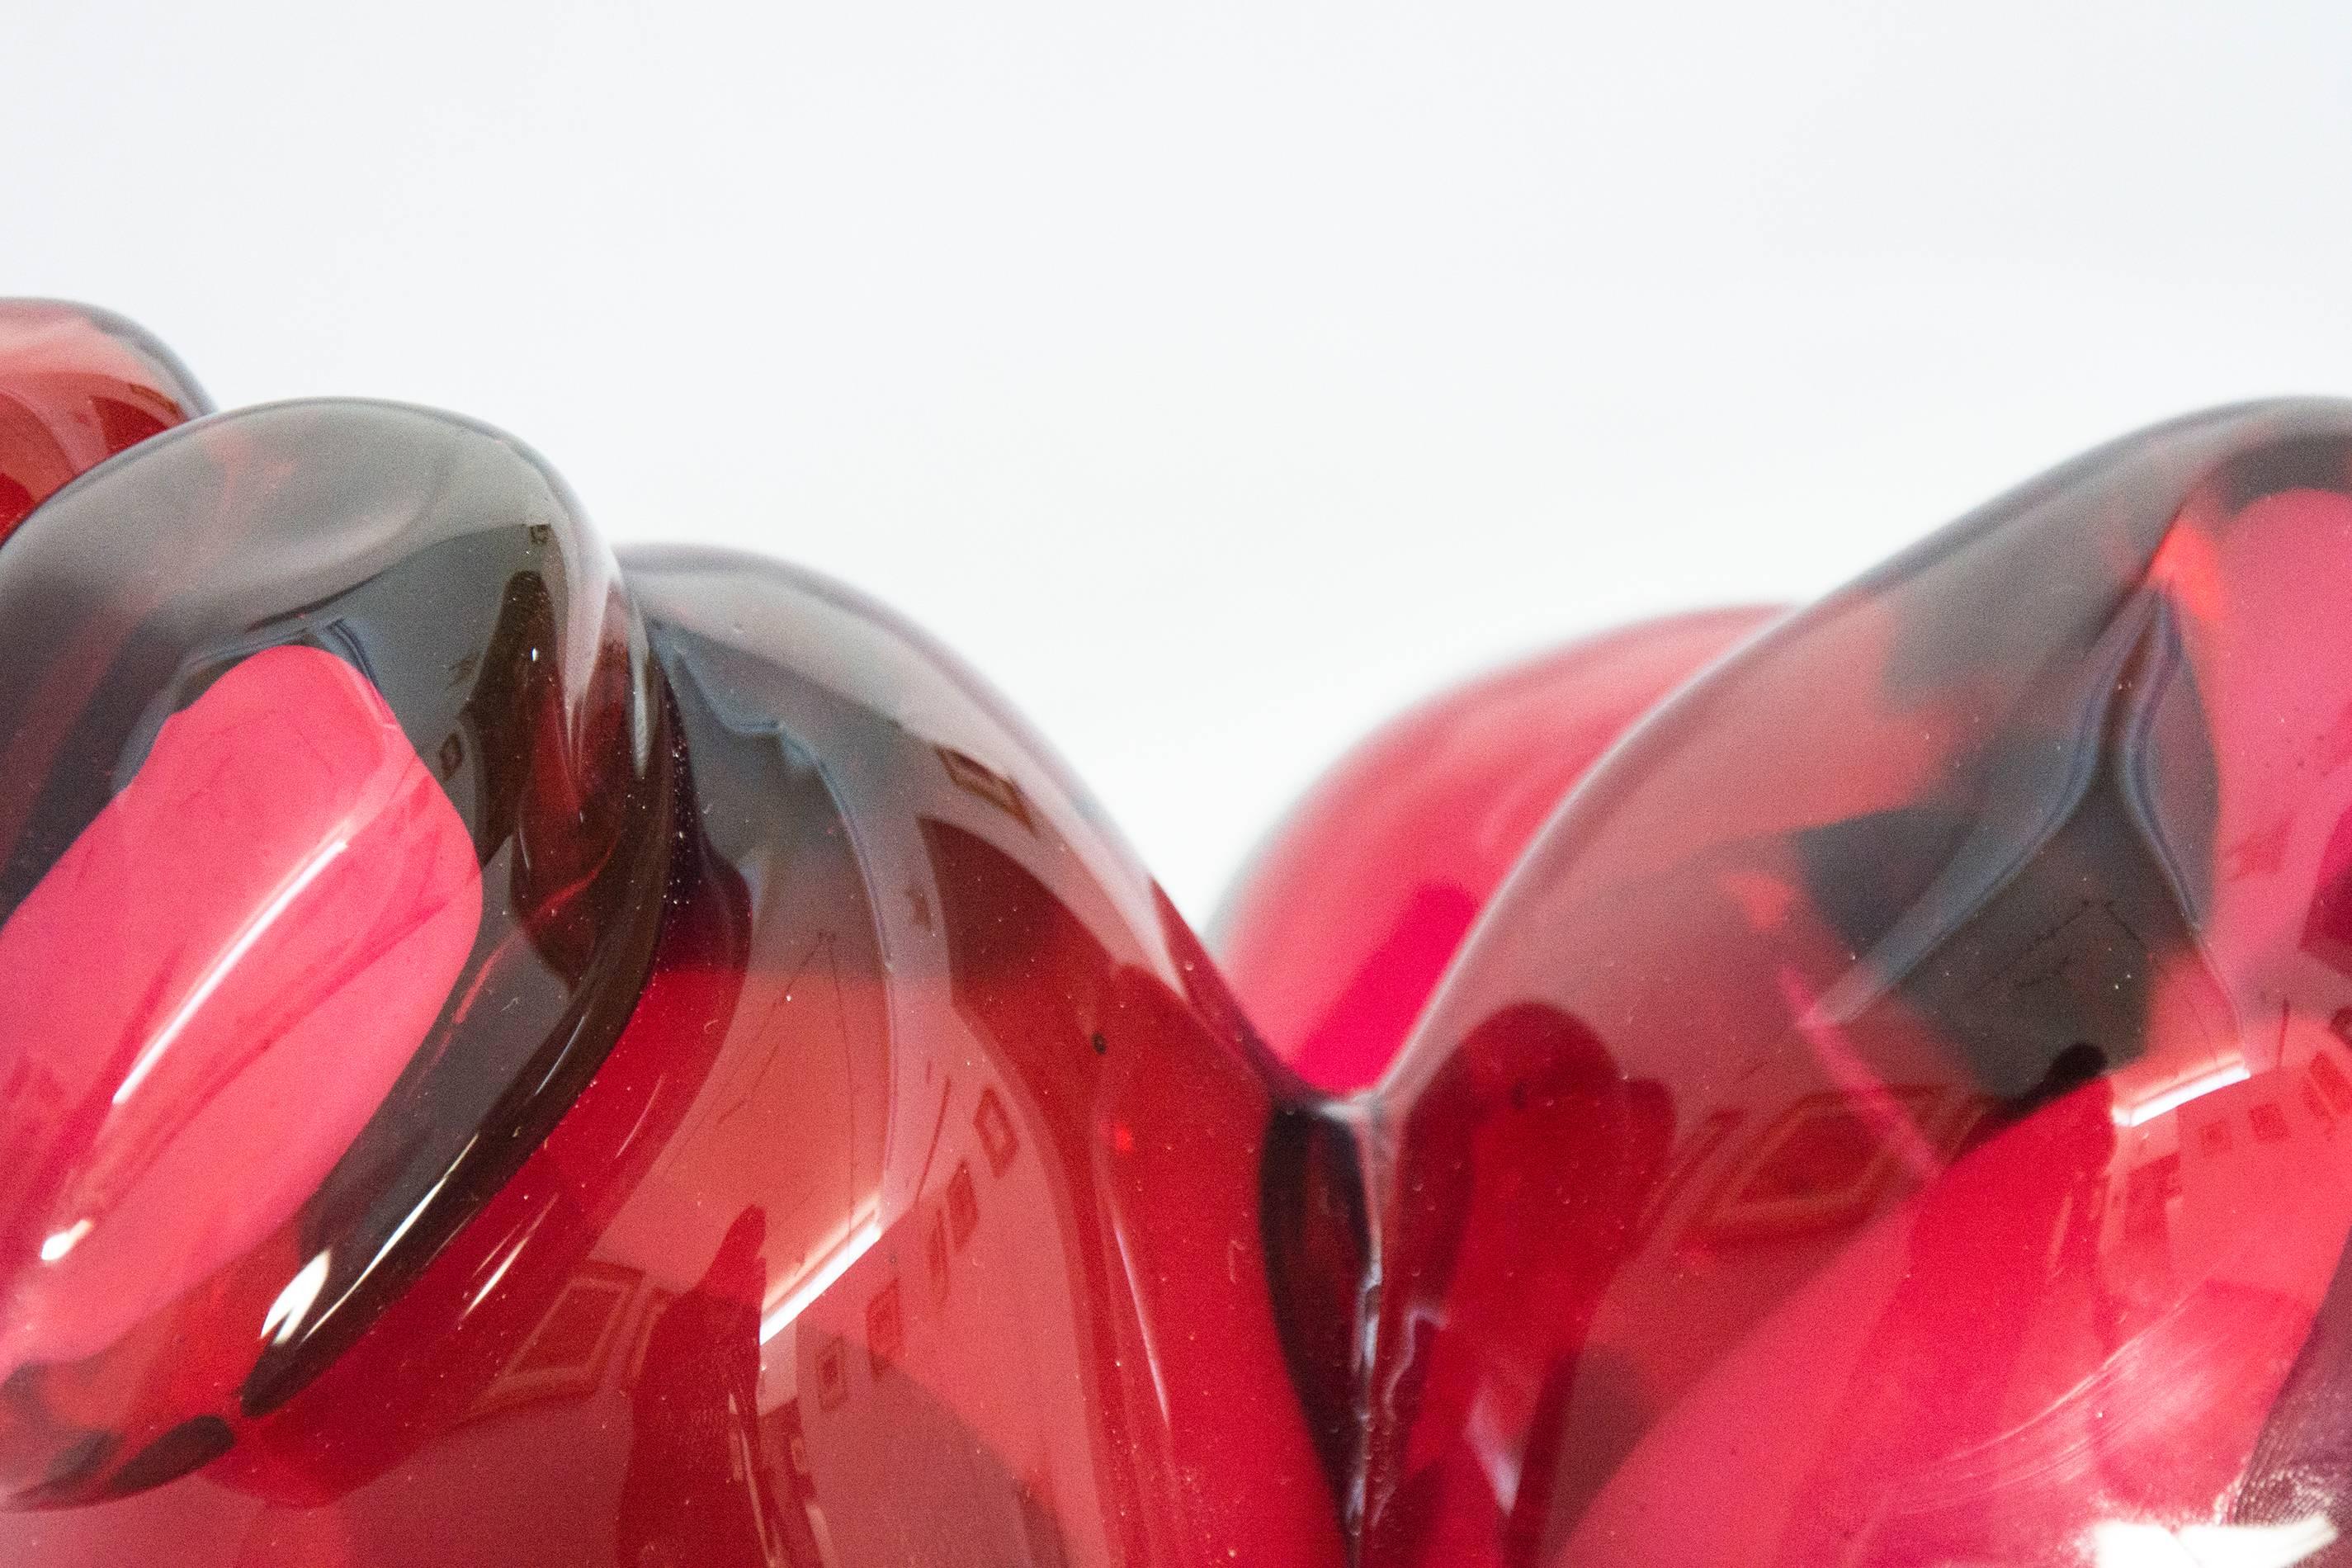 From the Earth: Emergence II - red, pomegranate, glass, still life sculpture - Sculpture by Catherine Vamvakas Lay